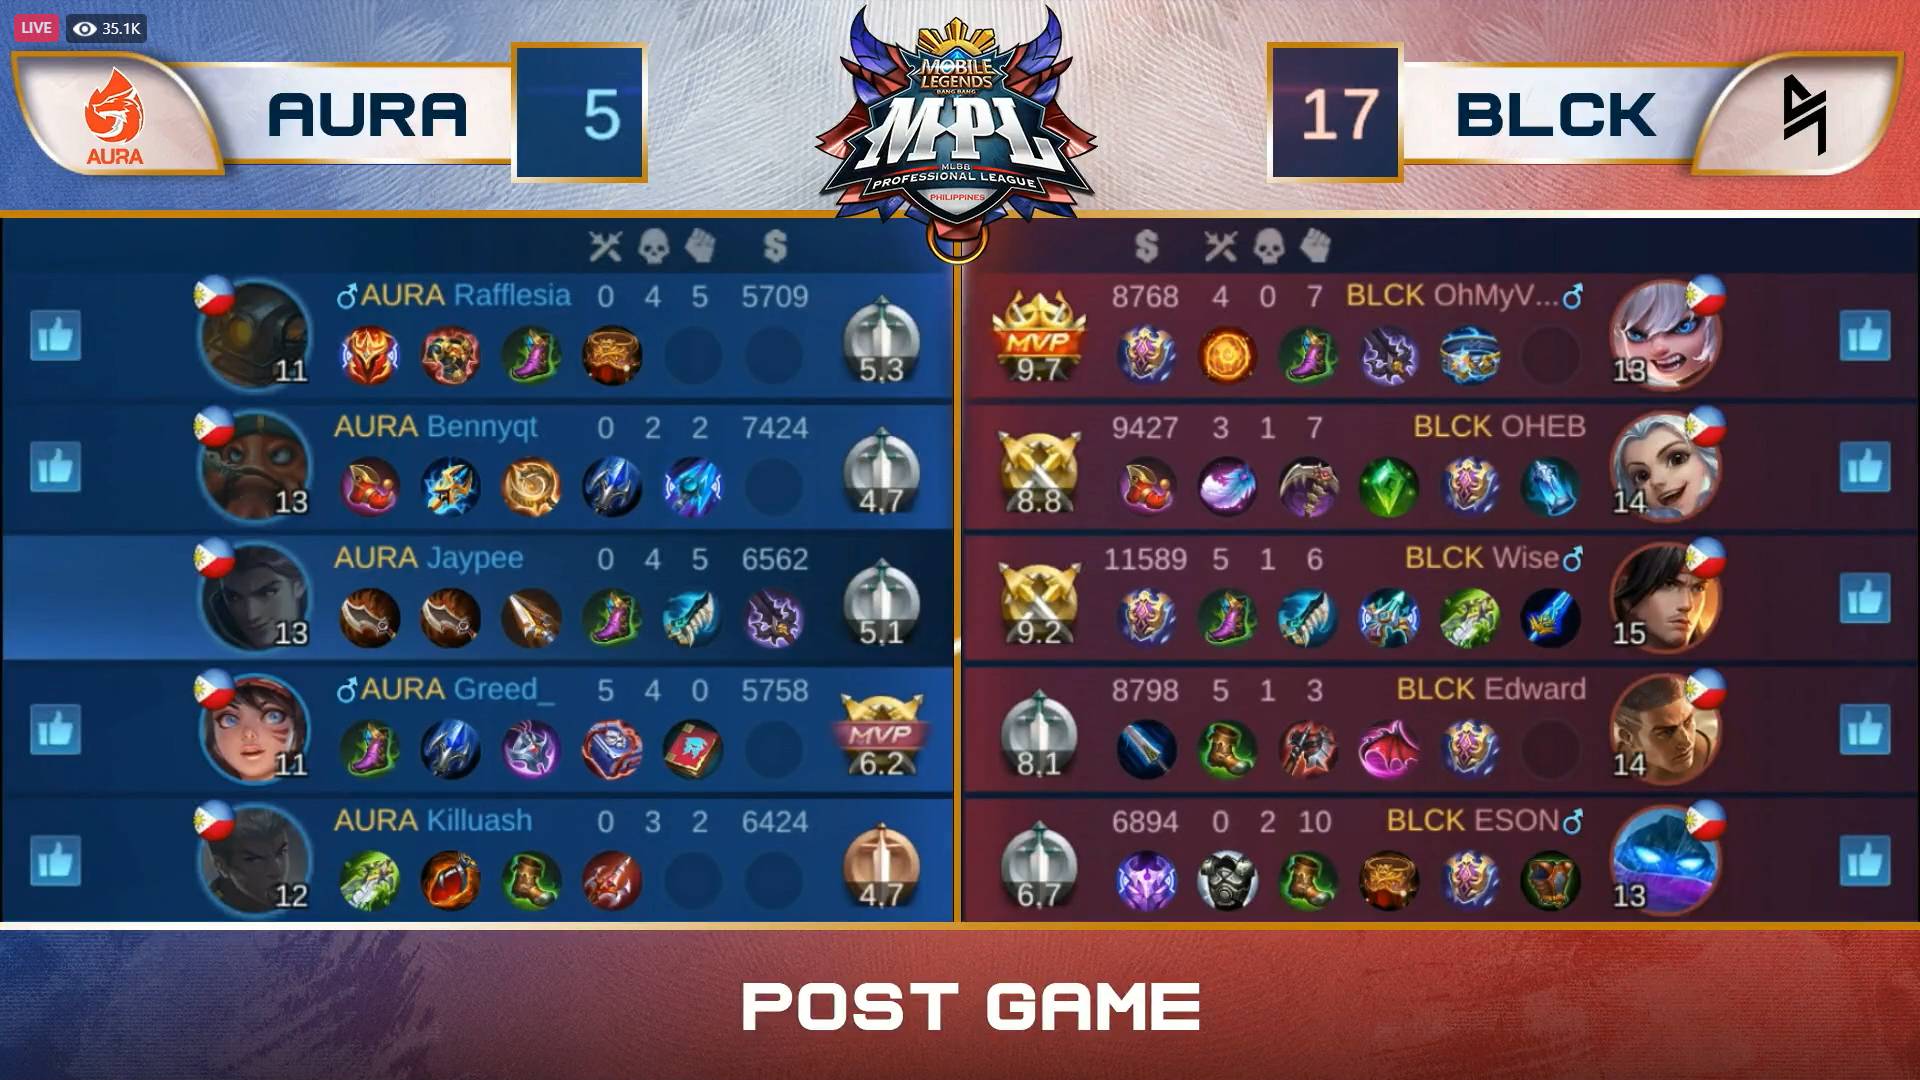 MPL-PH-7-Blacklist-def-Aura-PH-Game-2 ESON powers Blacklist to come-from-behind win vs Aura PH in MPL-PH ESports Mobile Legends MPL-PH News  - philippine sports news